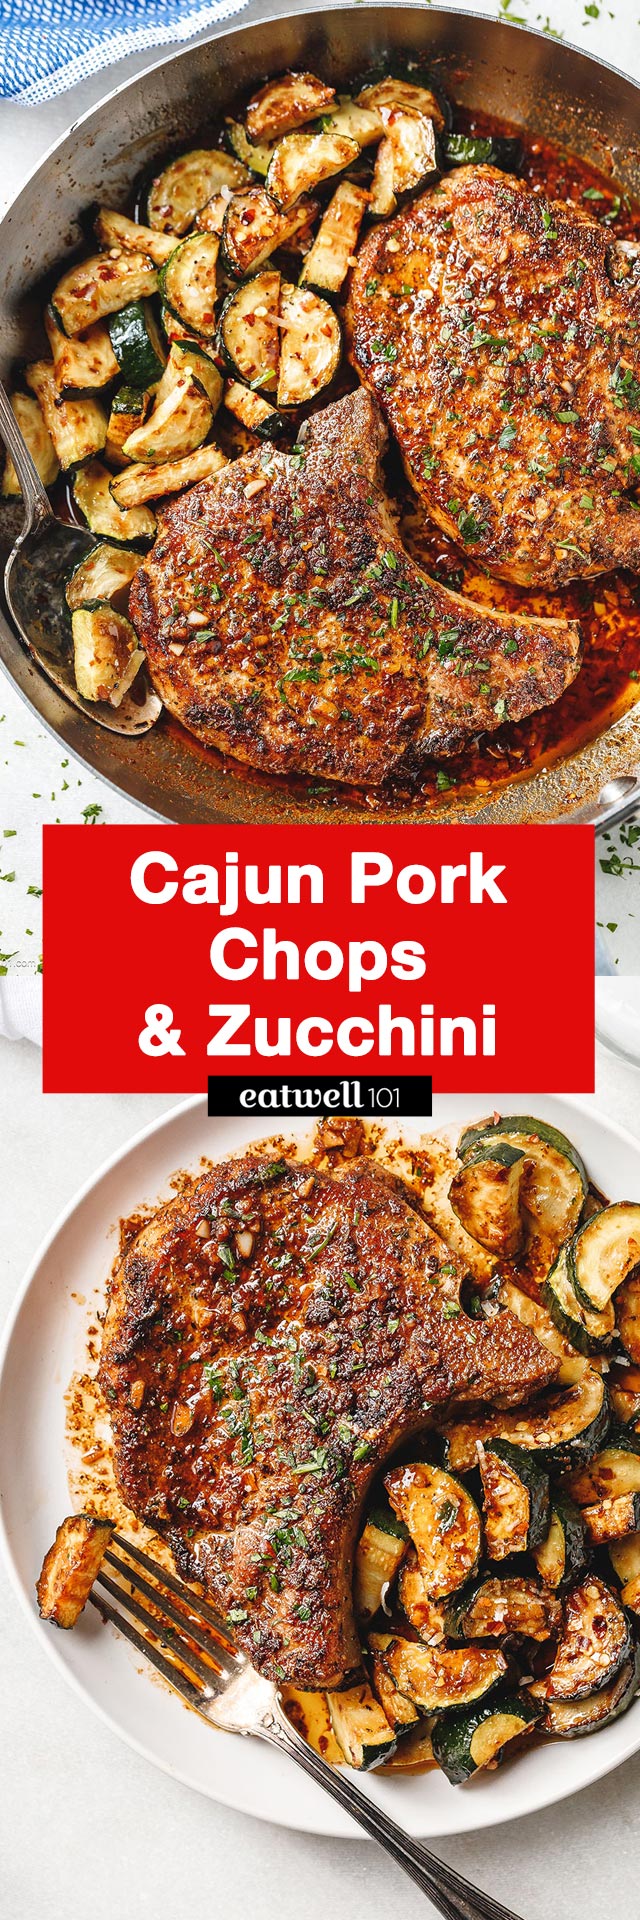 Cajun Pork Chops Recipe with Zucchini  - #pork #chops #reicpe - These delicious cajun pork chops are tender with crispy edges - You'll love the flavors! 